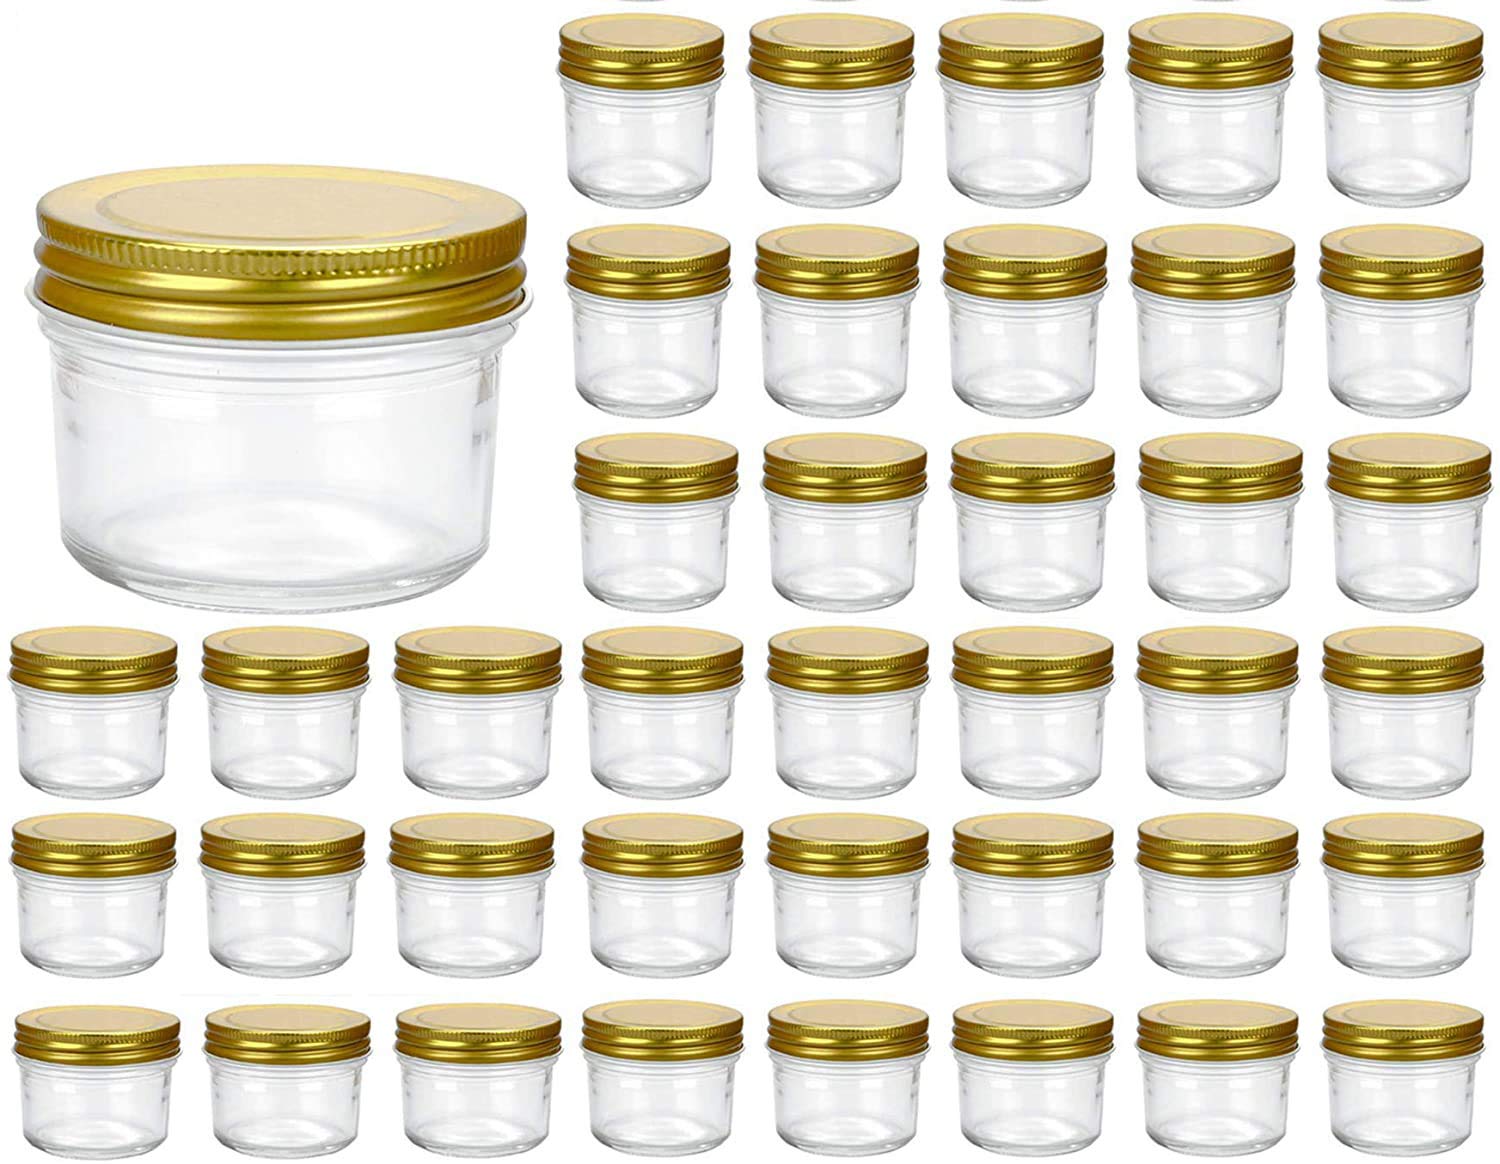 Encheng 4 oz Clear Glass Jars With Lids(Golden),Small Spice Jars For Herb,Jelly,Jams,Wide Mouth Manson Jars Canning Jars For Kitchen Storage 40 Pac...